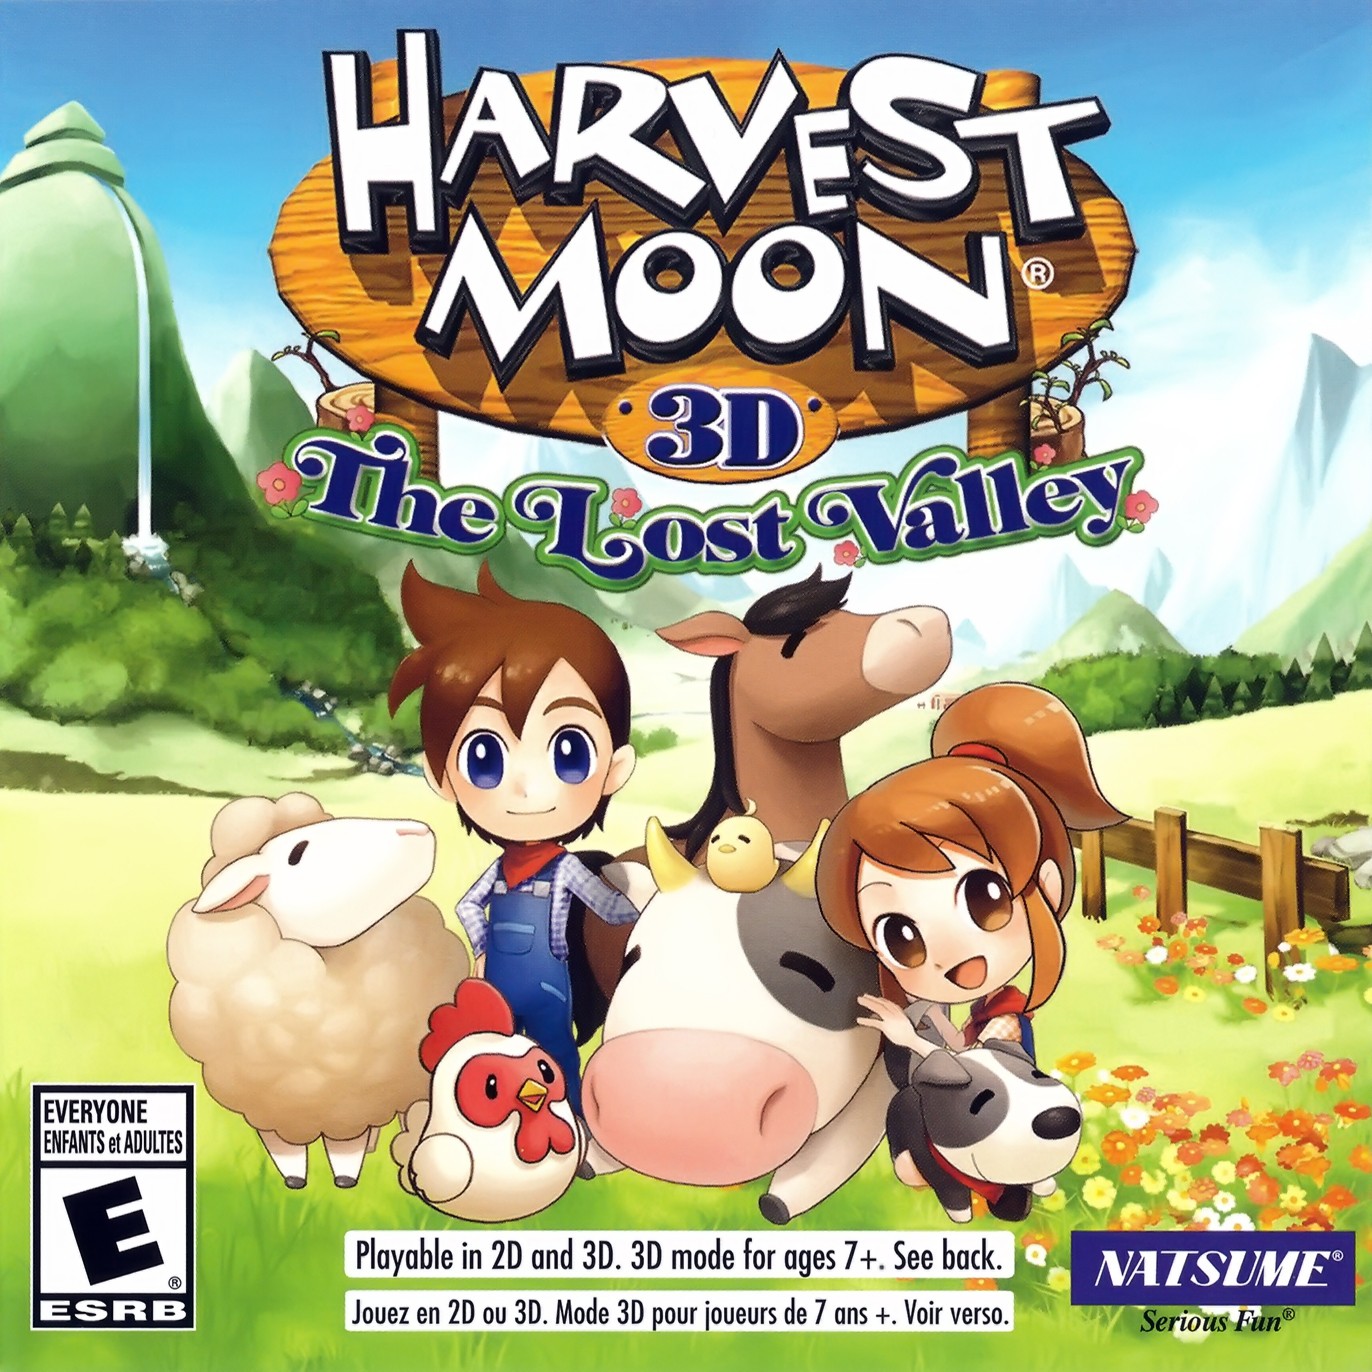 'Harvest Moon 3D: The Lost Valley'